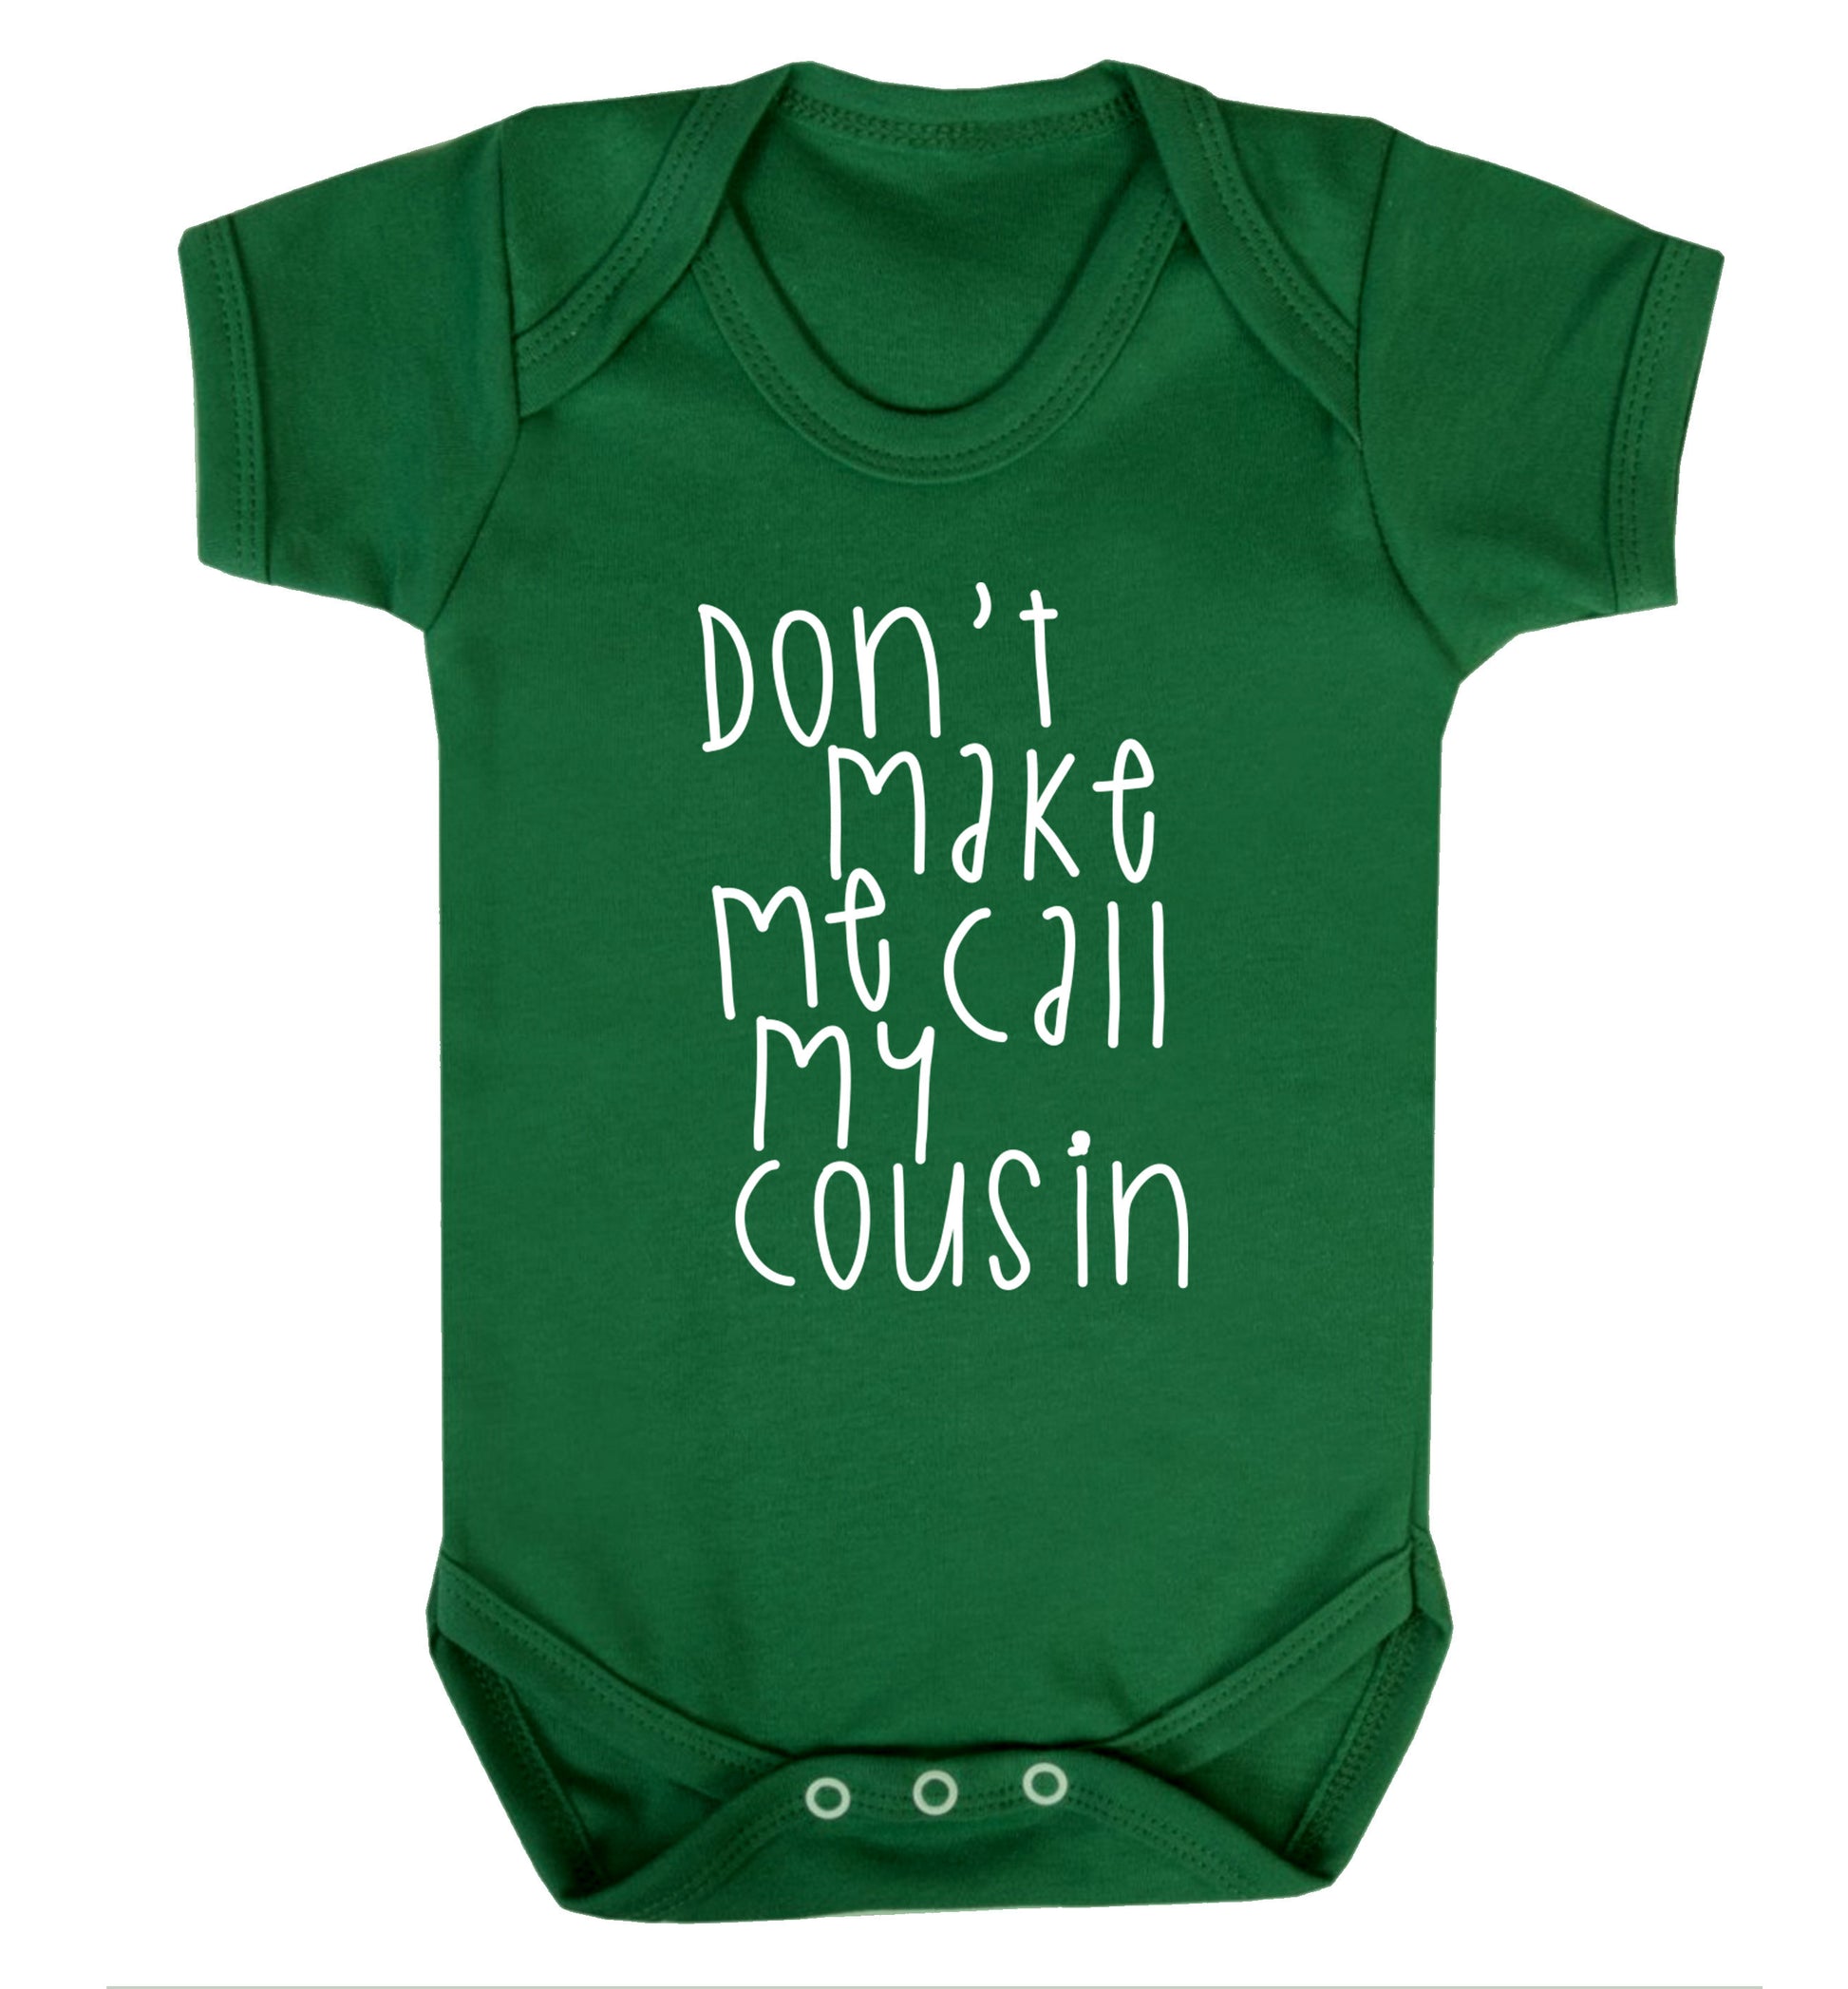 Don't make me call my cousin Baby Vest green 18-24 months